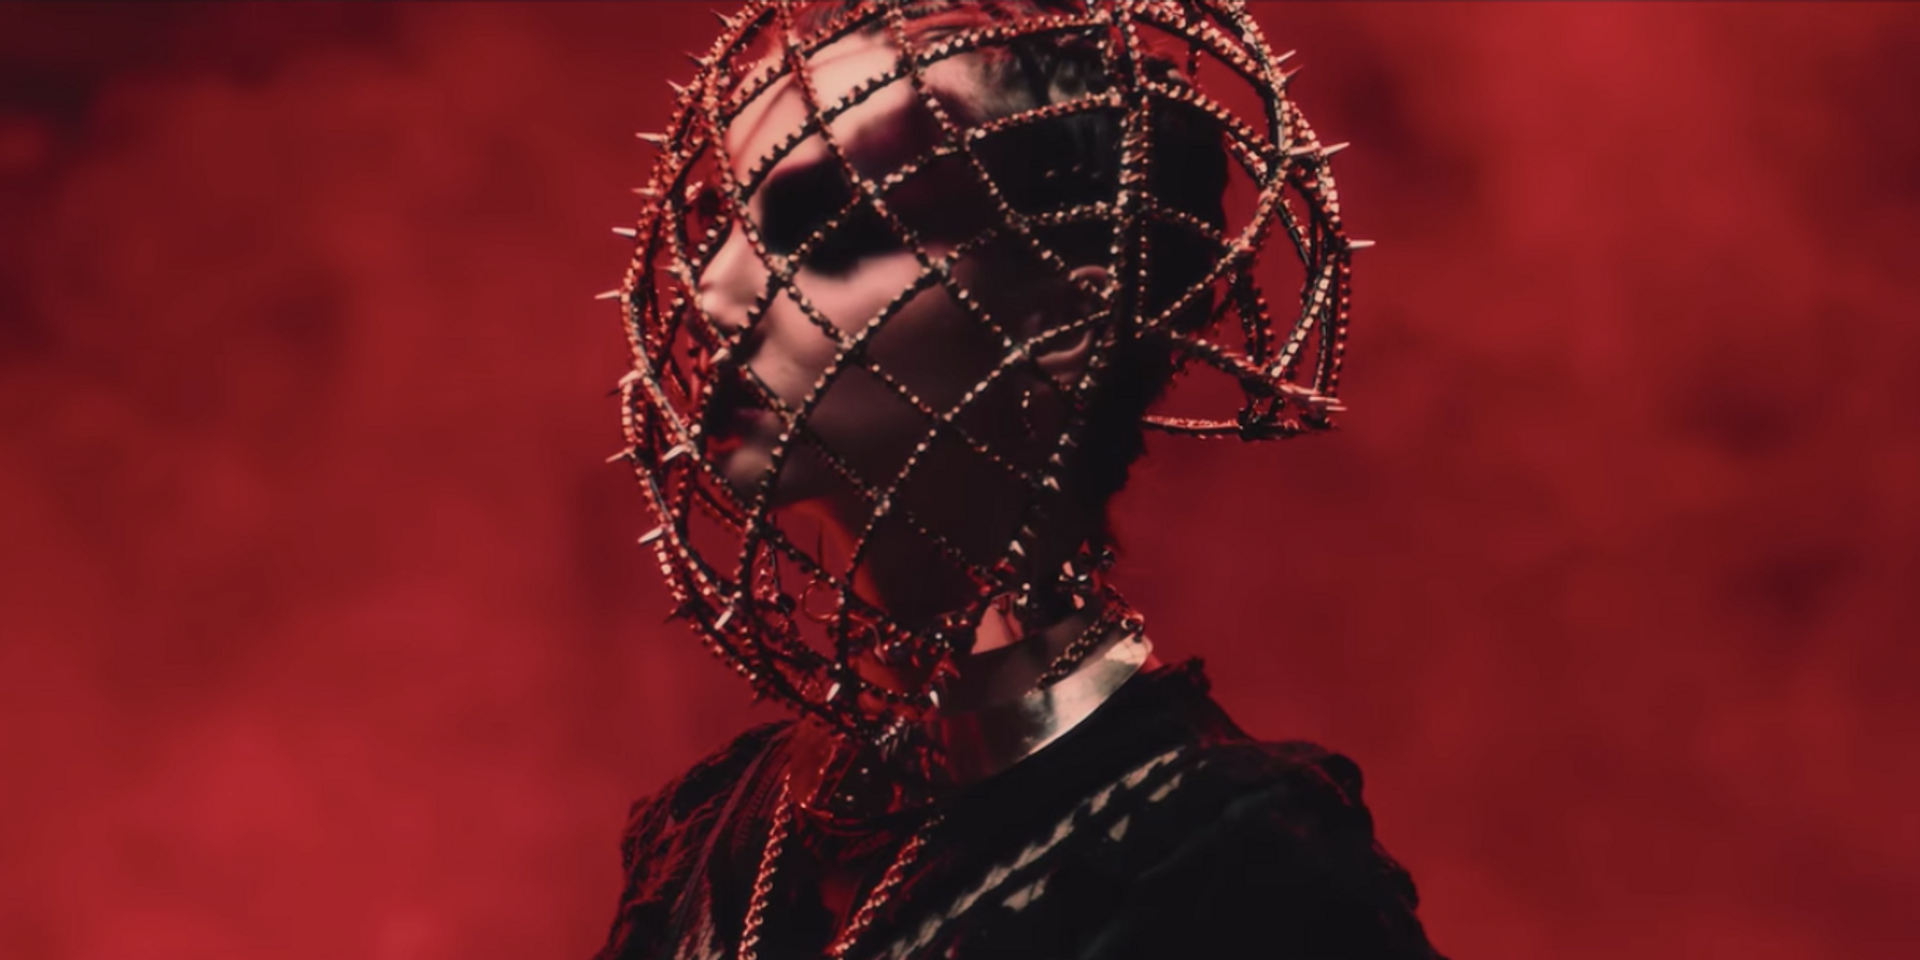 BABYMETAL release music video for new single 'Distortion' – watch